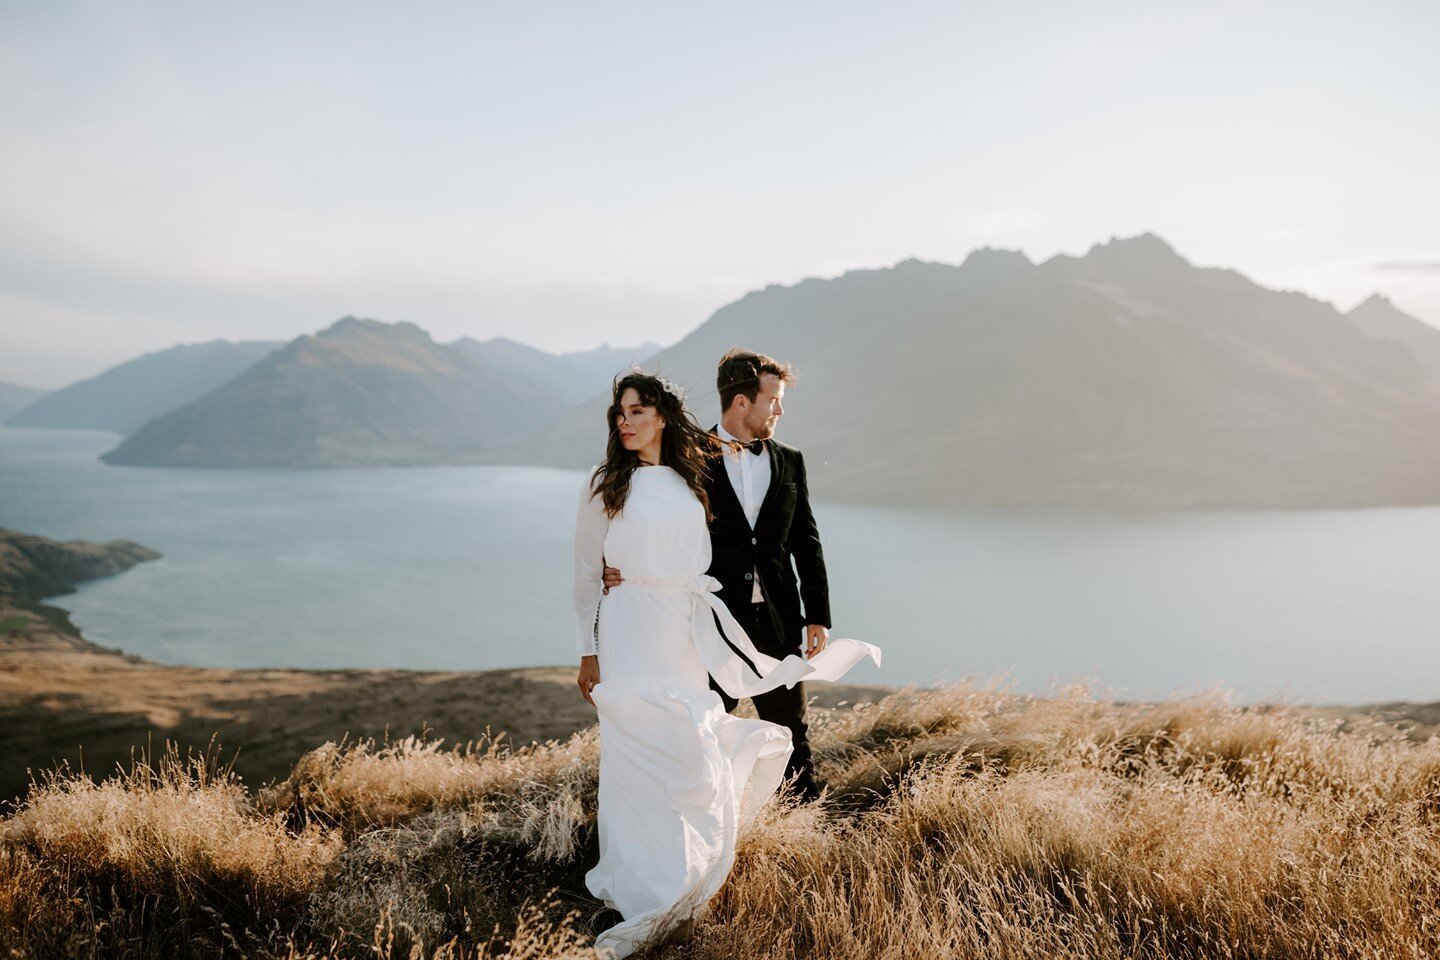 "Now at last they were beginning chapter one of the great story which no one on Earth has read : which goes on forever : in which every chapter is better than the one before."⁠
-- C.S. Lewis⁠
⁠
⁠
⁠
Dress Hire: @nemobridal⁠
Suit Hire: @omen.suit.hire⁠